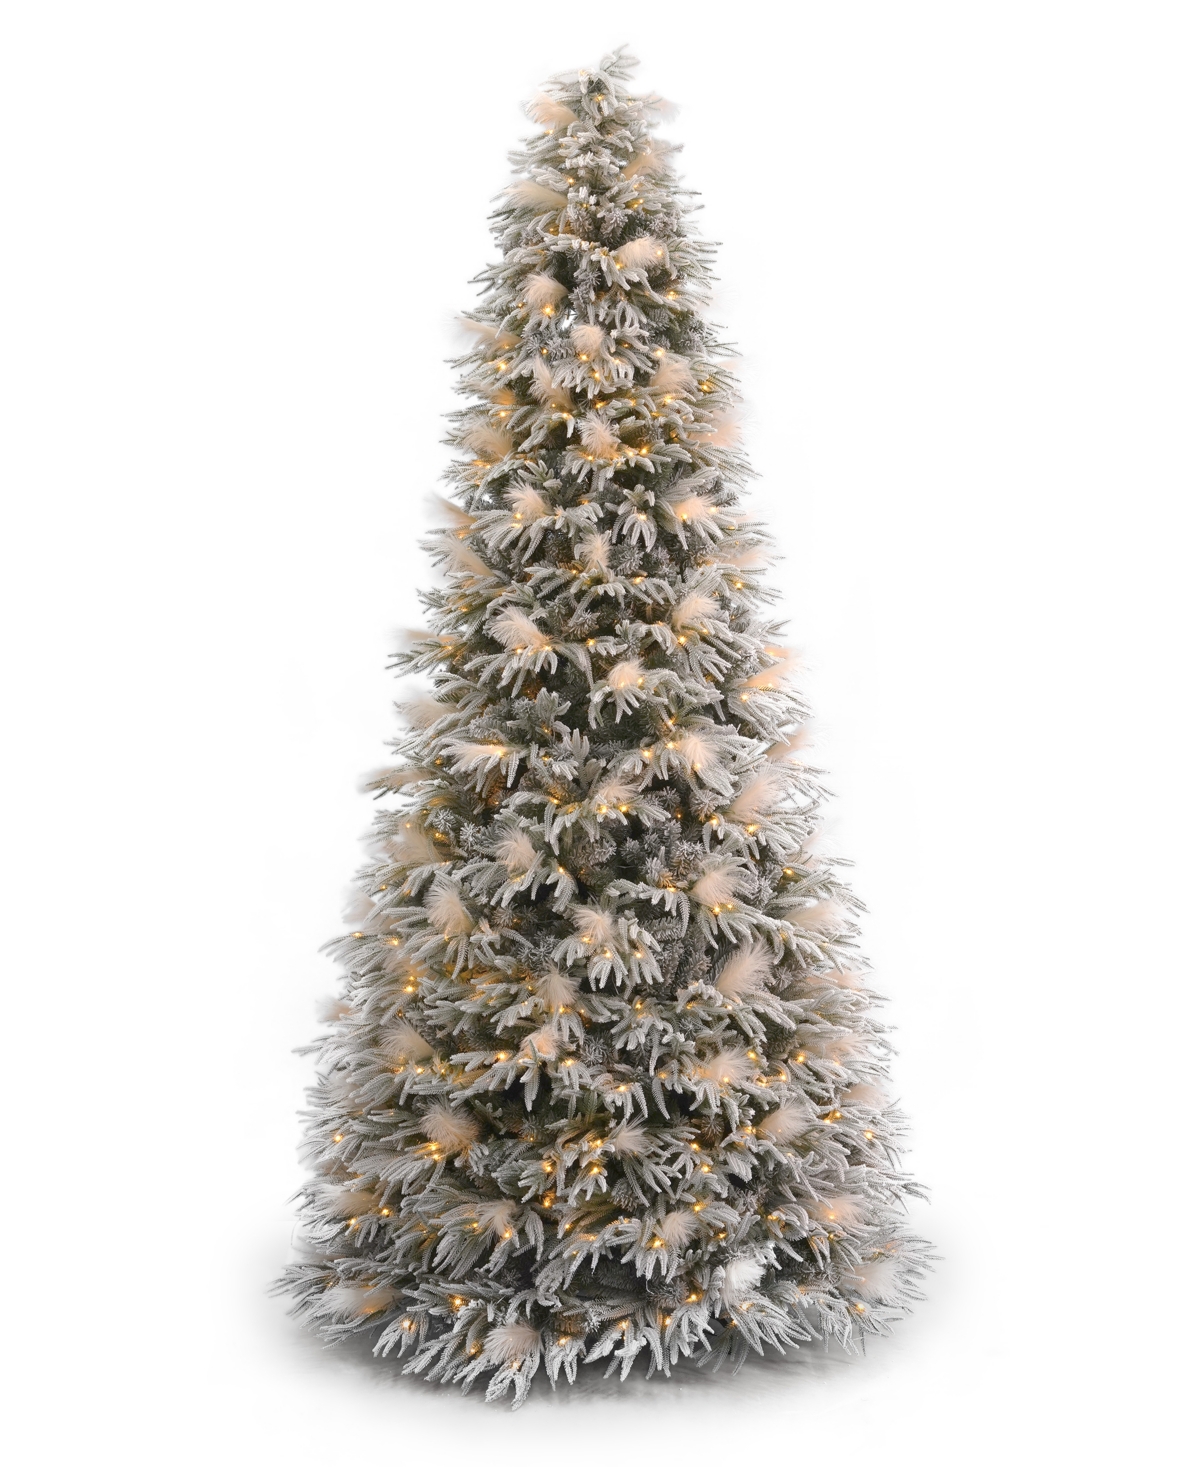 Pine and Pampas 10' Pre-Lit Flocked Pe Mixed Pvc Tree, 11880 Tips, 114 Pieces Pampas, 800 Warm Led, Ez-Connect, Remote, Storage Bag - Green